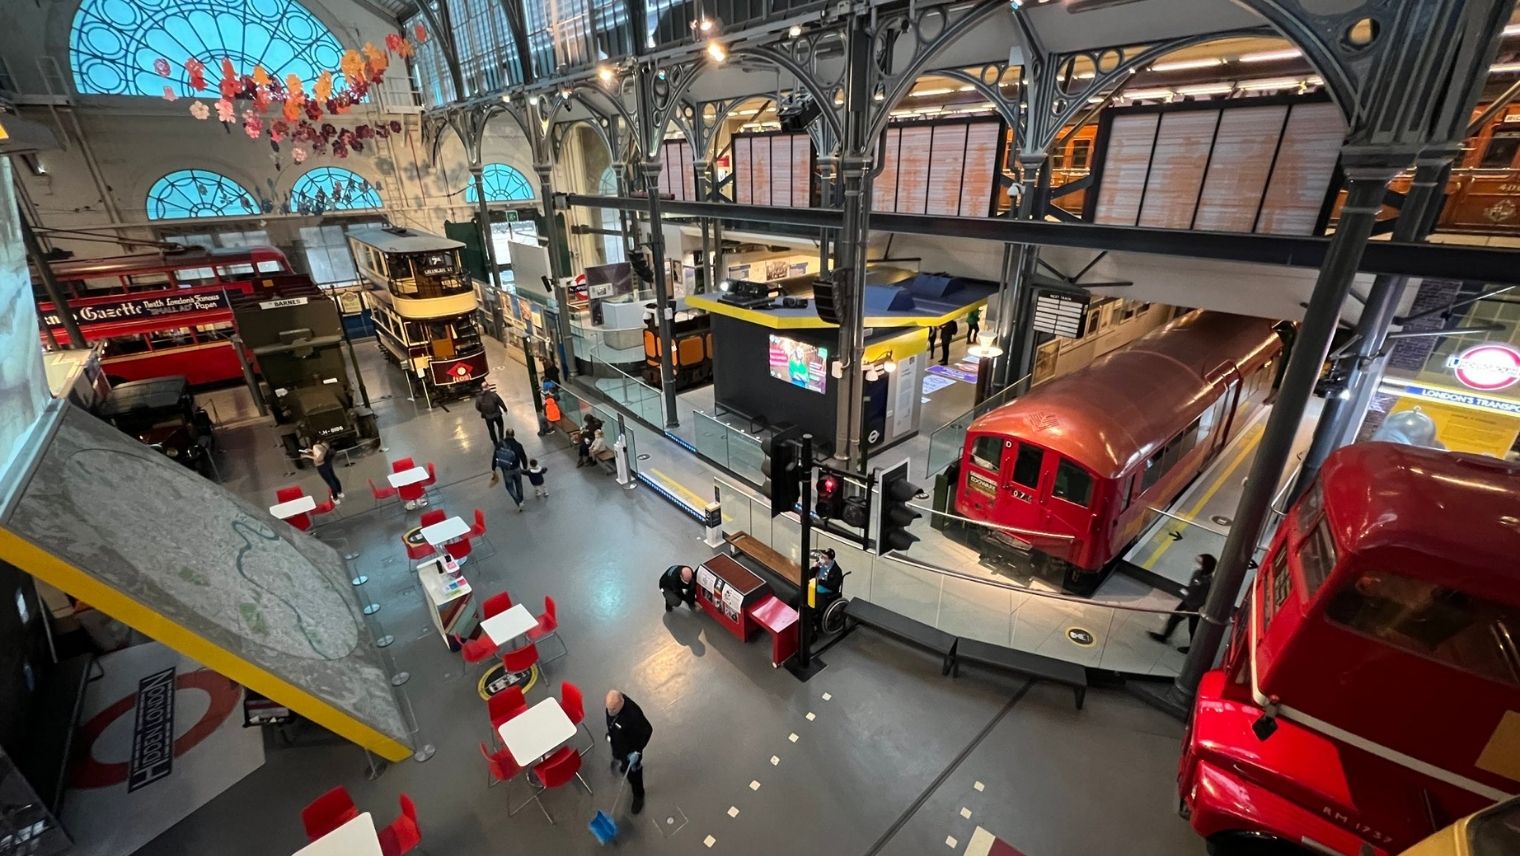 A view from a balcony of the London Transport Museum showing buses and a tube train